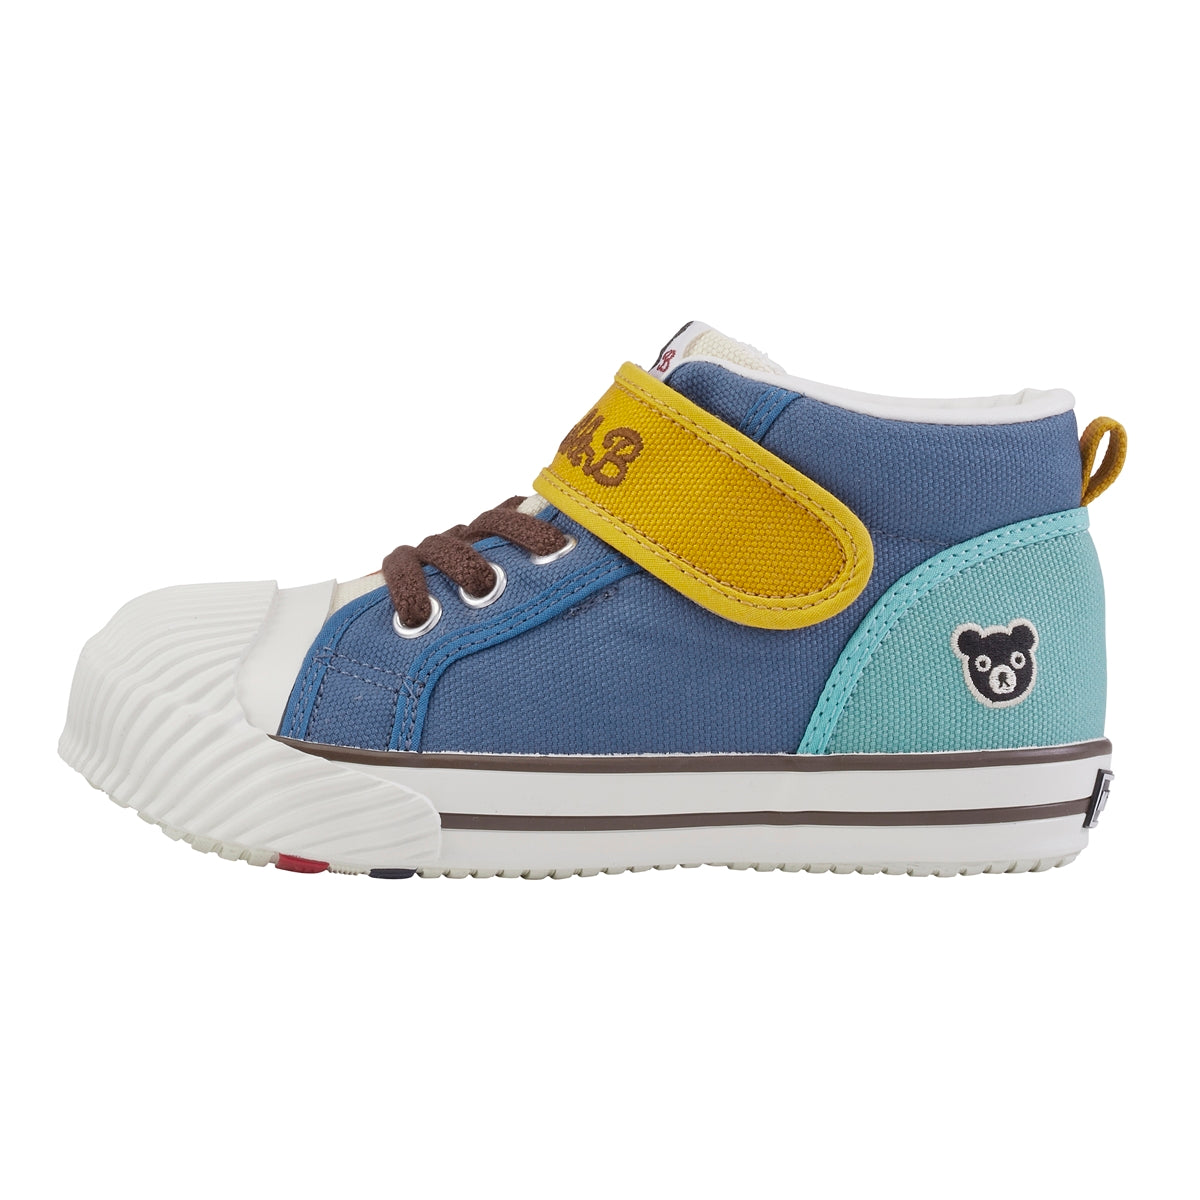 Oxford-Meets-Texture Sneakers for Kids